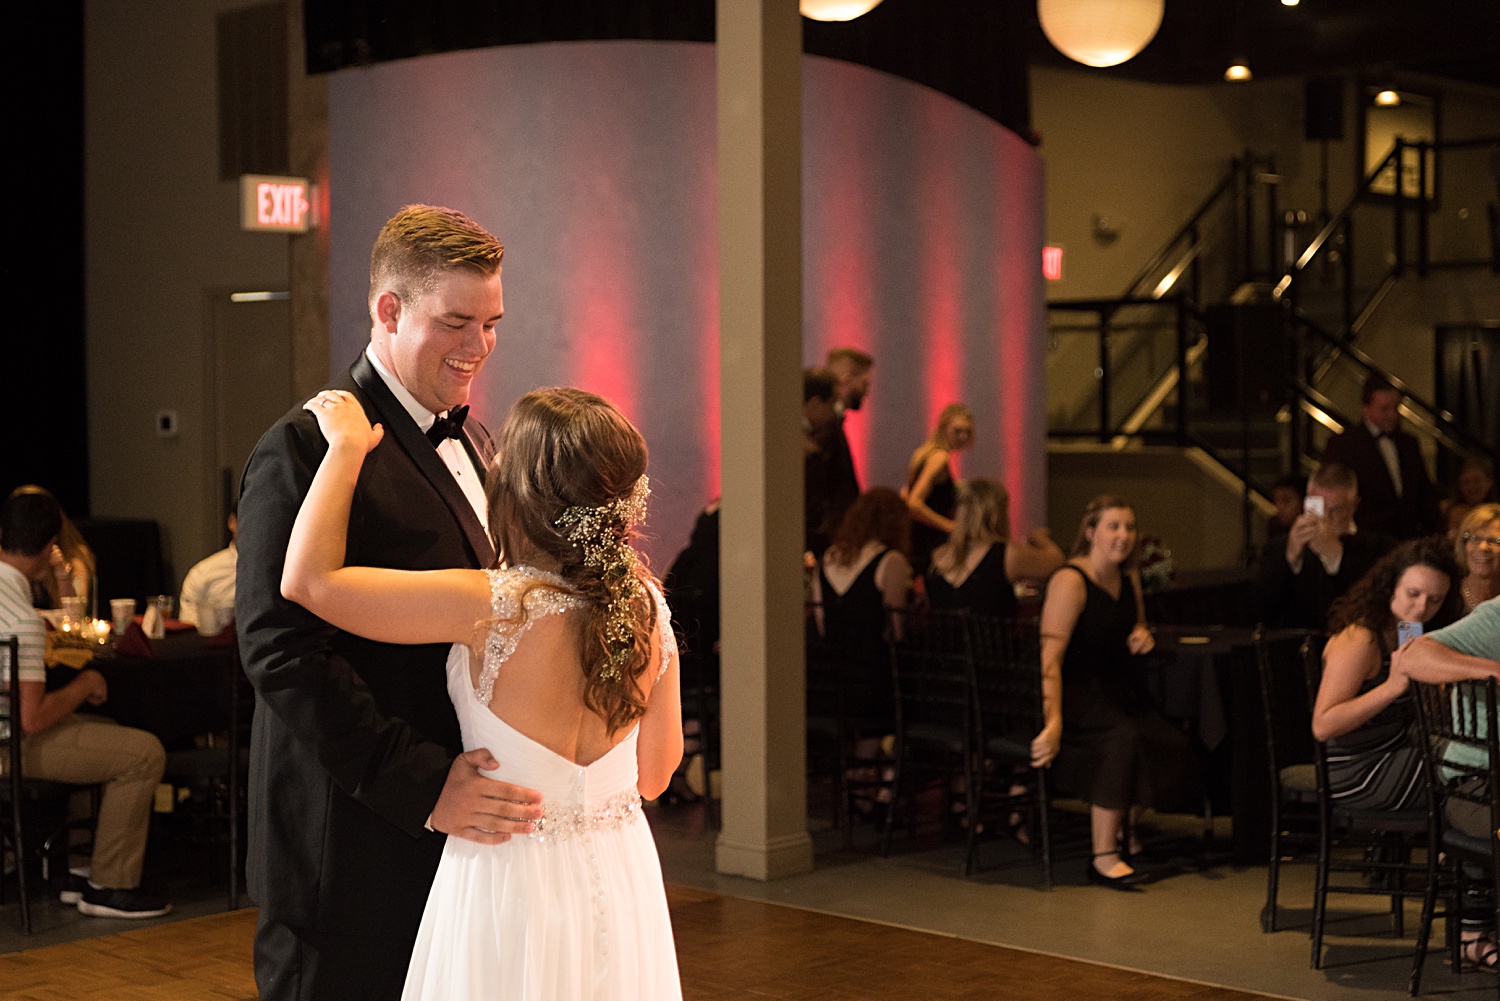 First dance photo, Wedding reception photos at Maceli's in Lawrence, KS